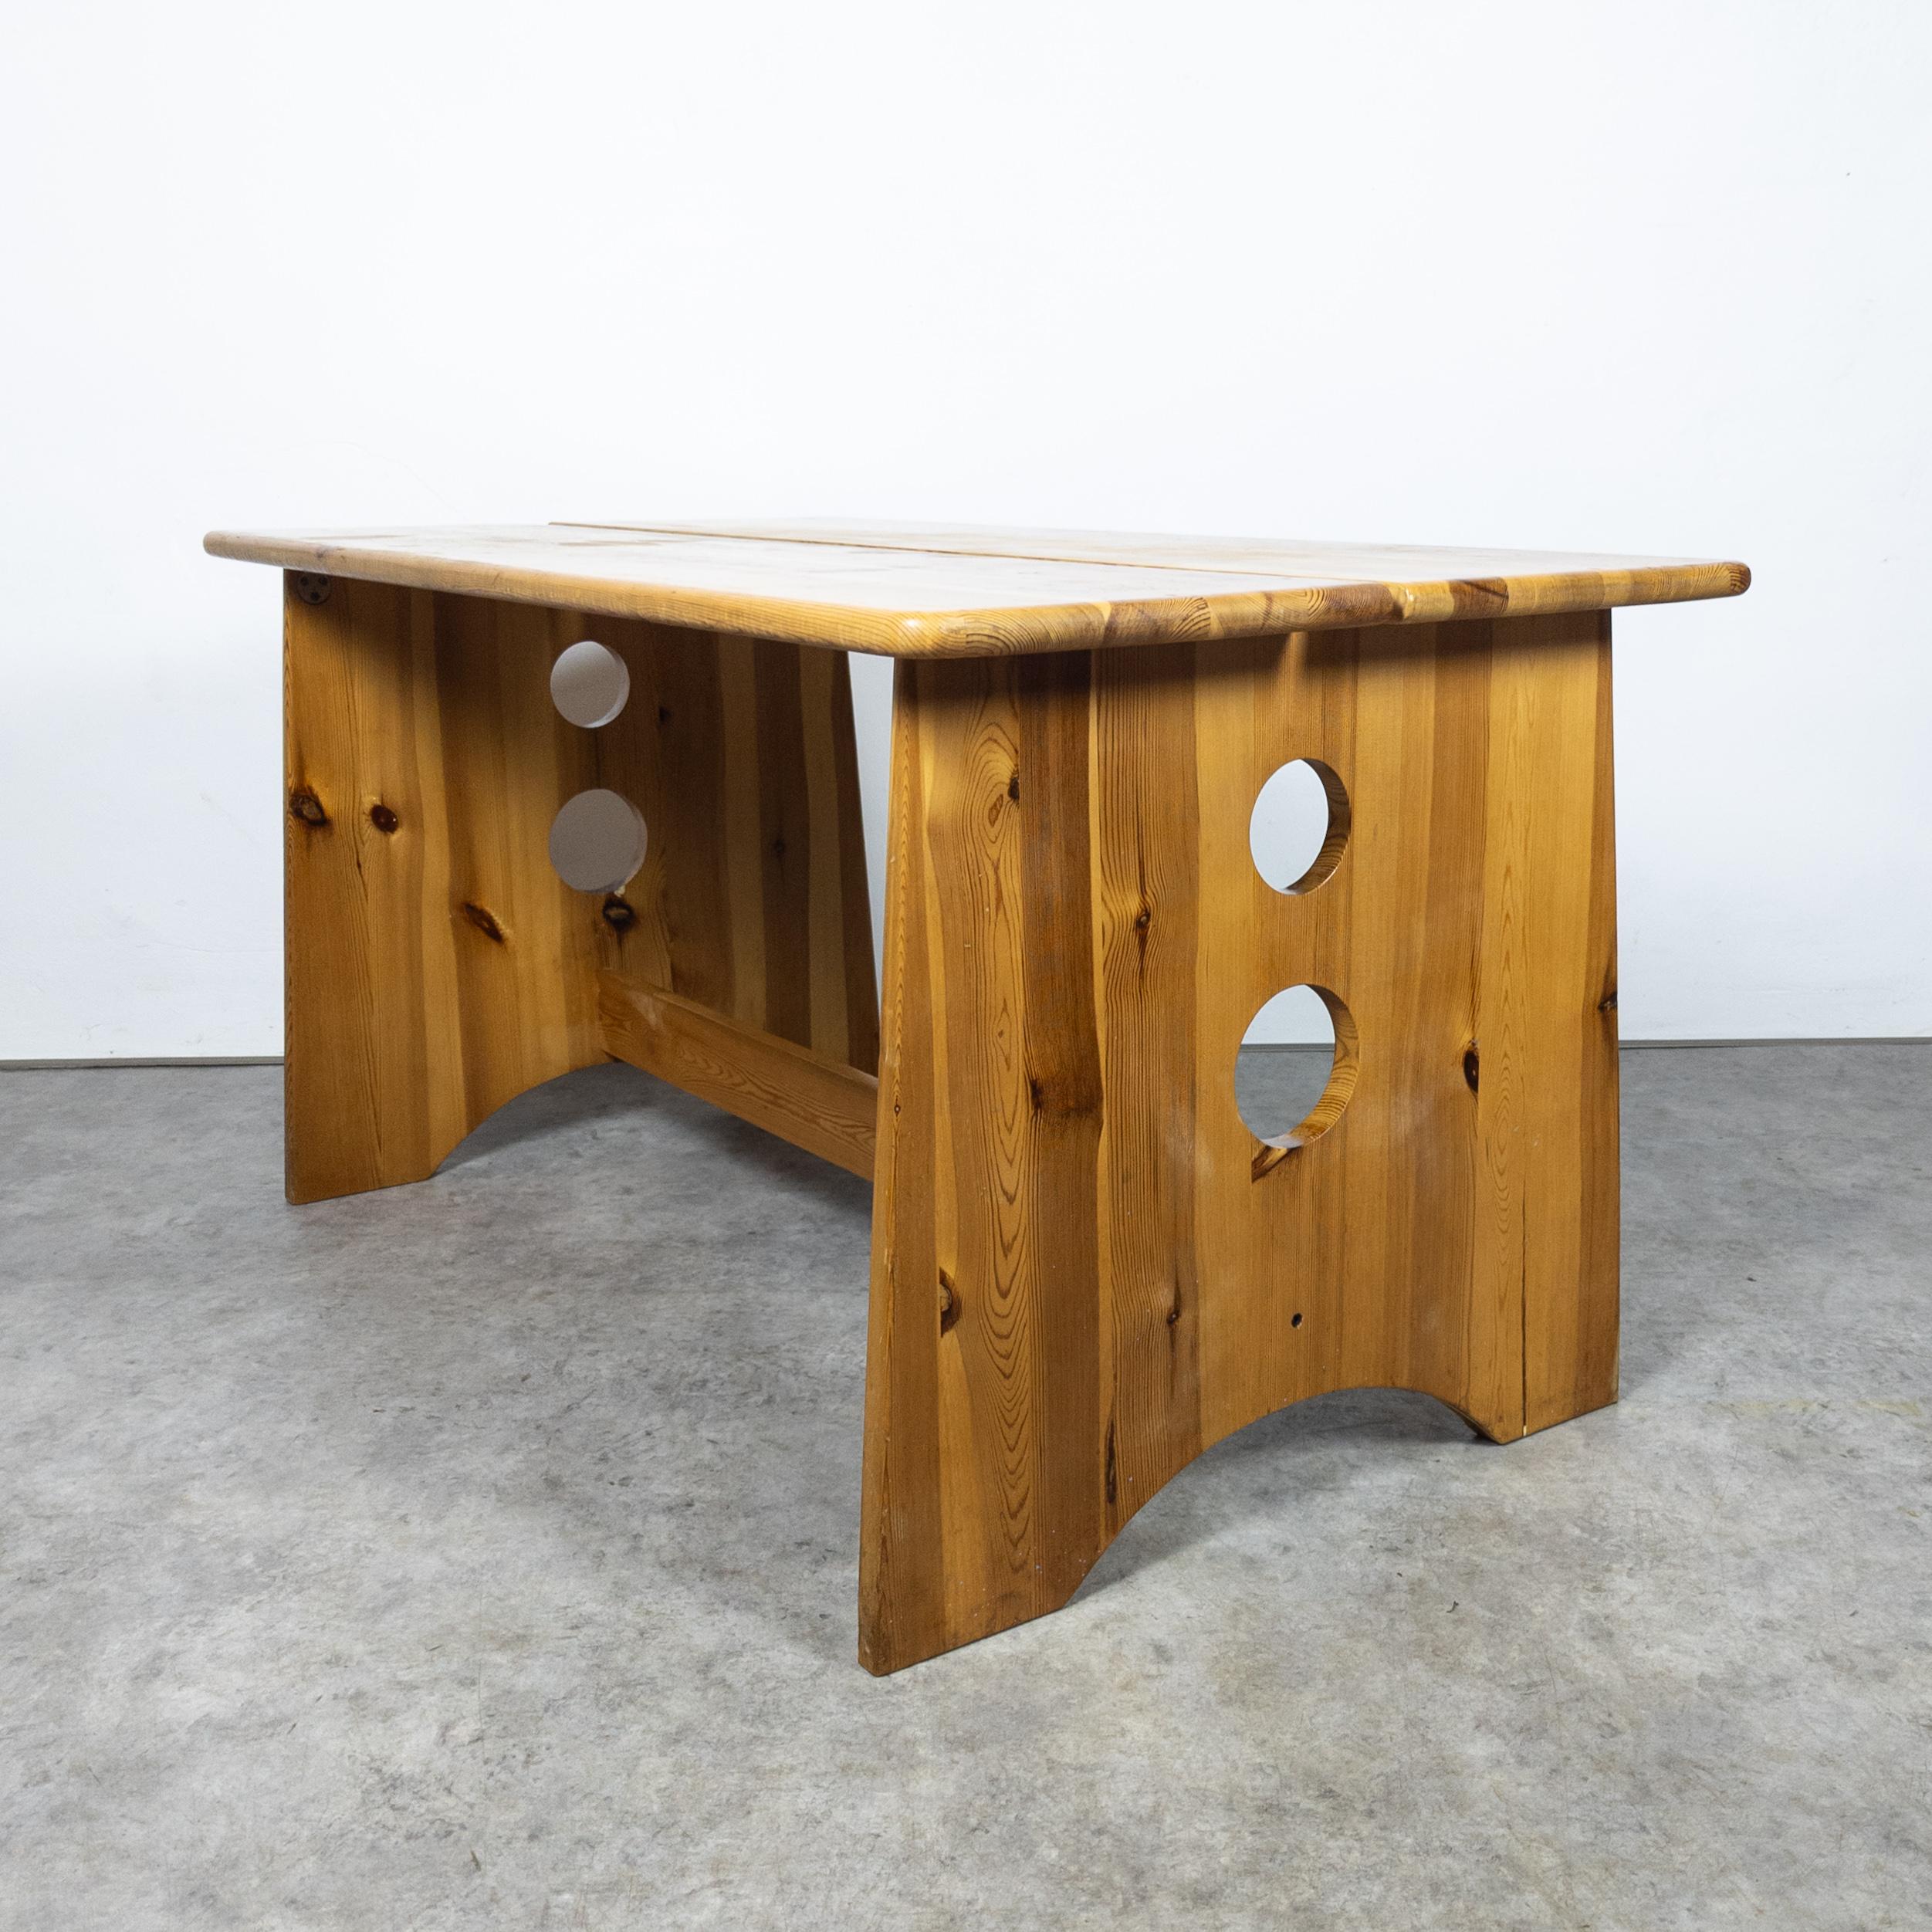 Sculptural Dining Set in Pine by Gilbert Marklund for Furusnickarn AB, 1970s For Sale 5